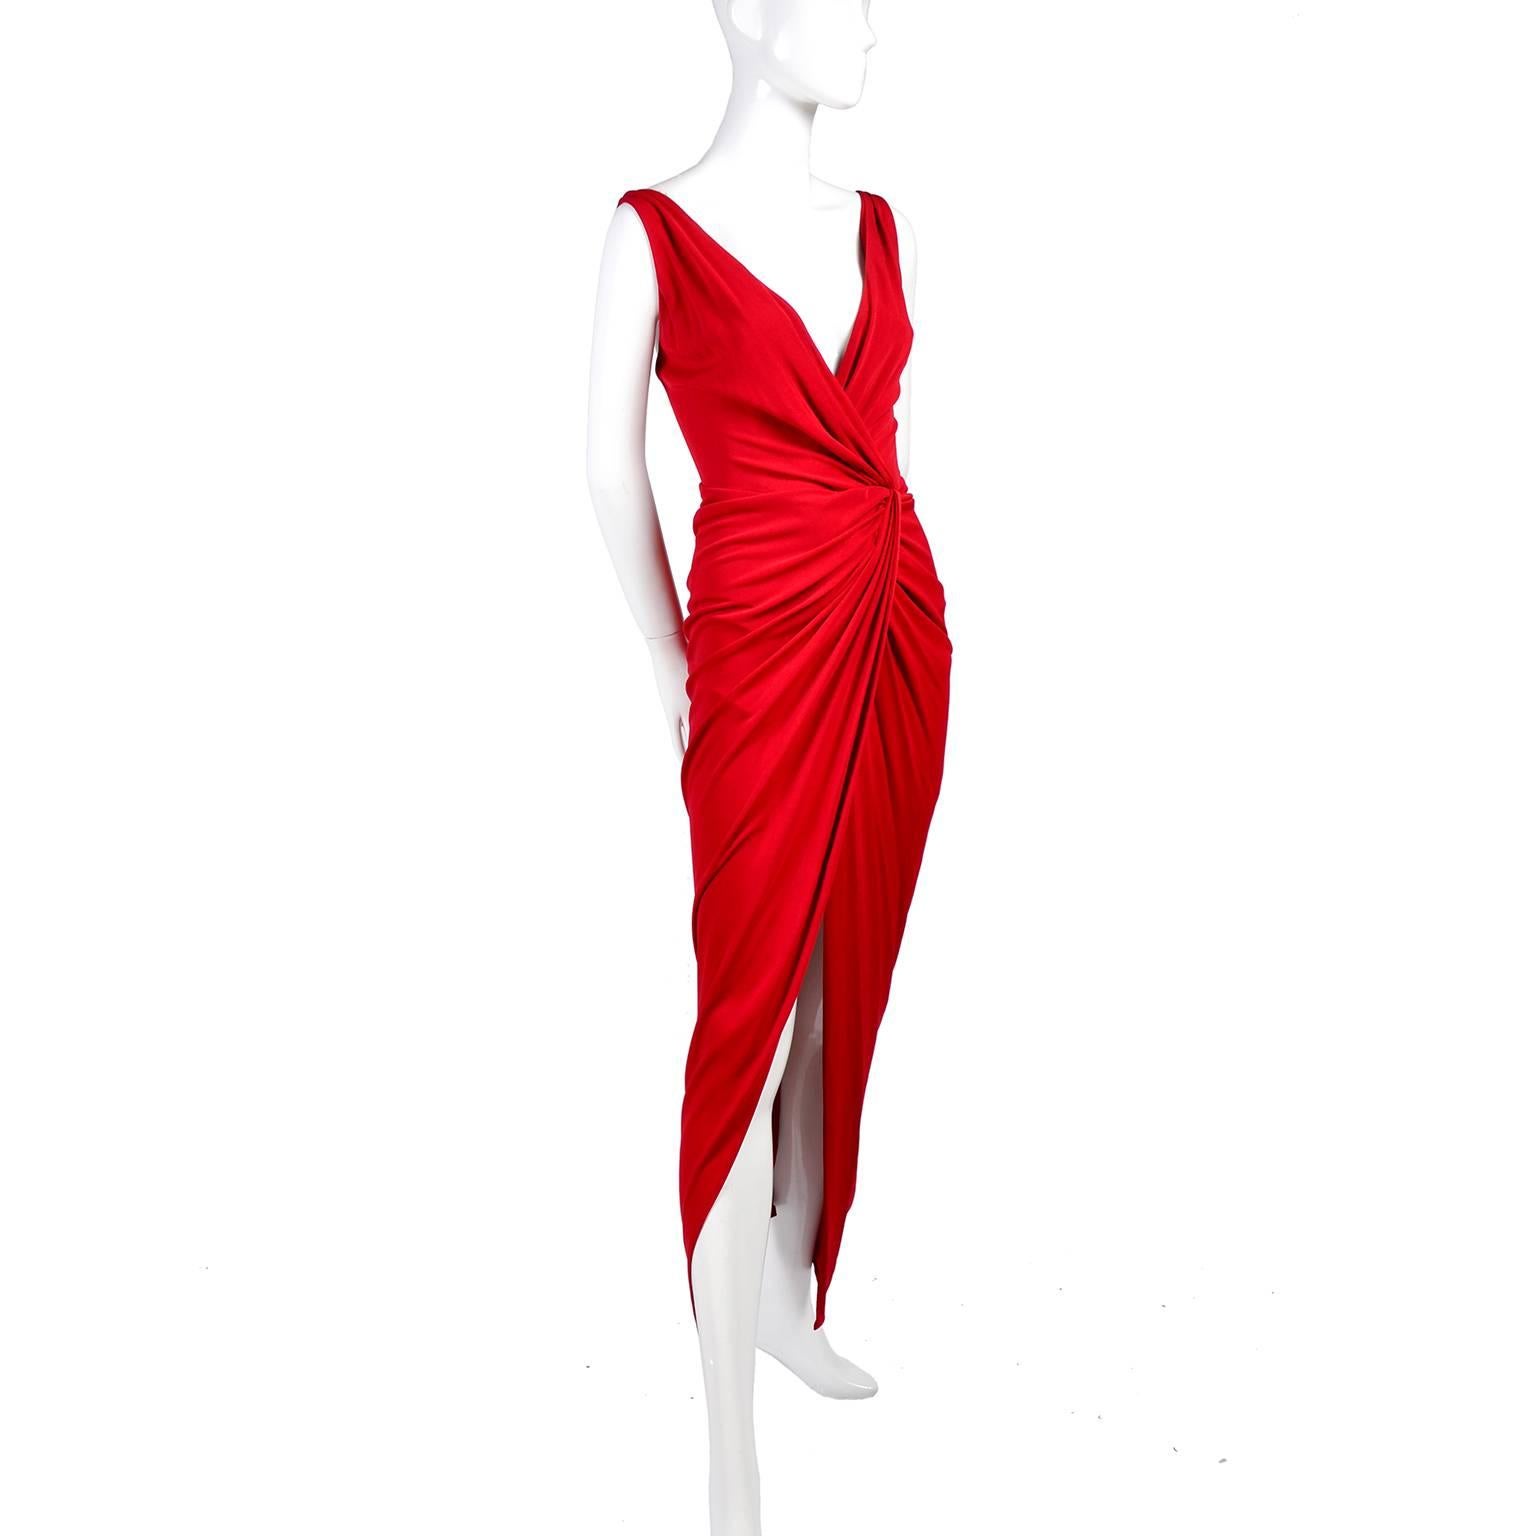 This is an incredible vintage red draped evening gown from Randoph Duke. This vintage dress has incredible draping, a low back, a slit up the leg and it is a show stopping, body hugging, stunning red carpet worthy piece! Though this is labeled a